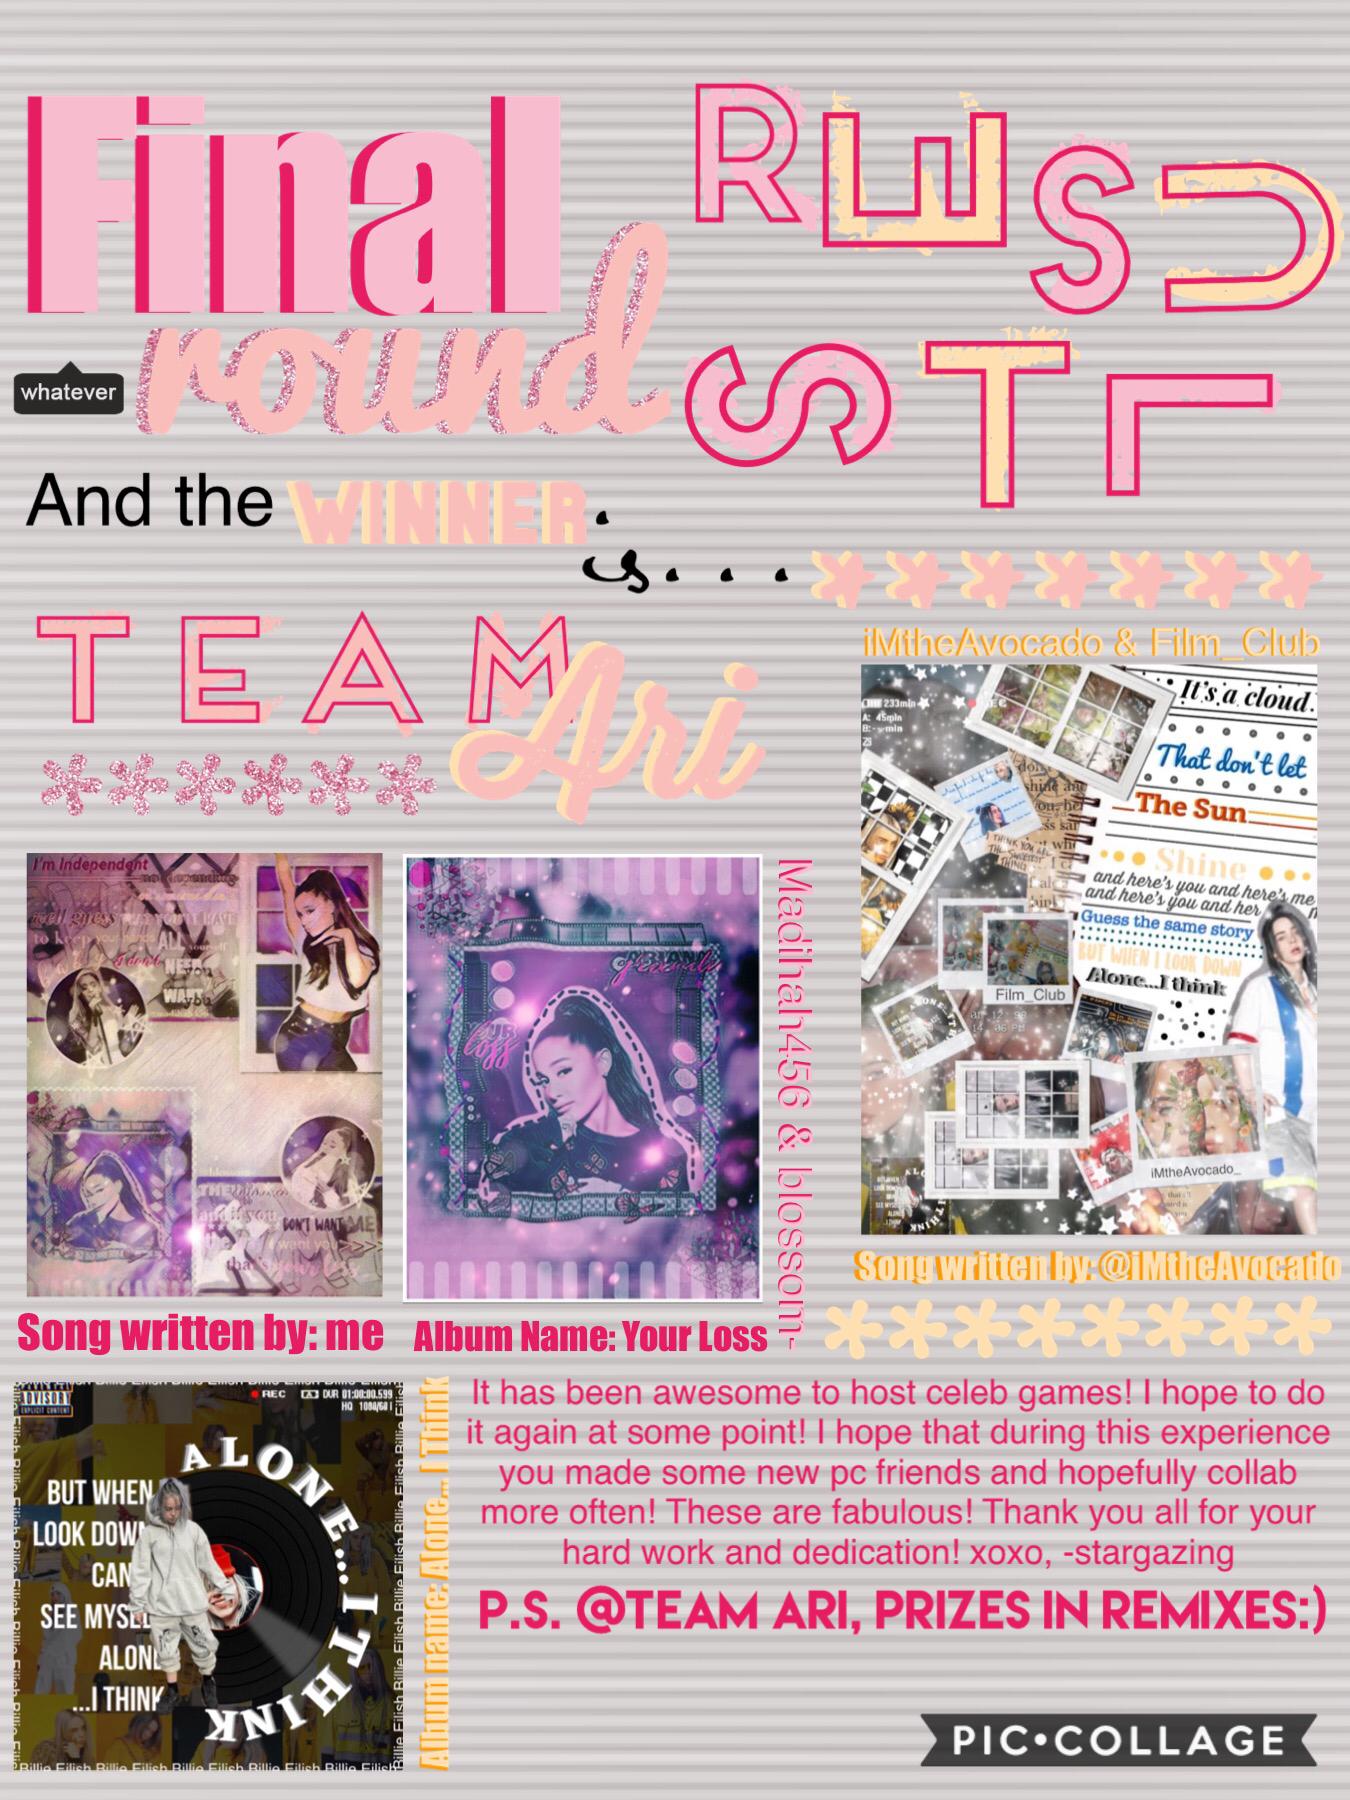 🌸TAP🌸
Way to go team Ari!💗you made won 3 rounds!🤩🤯 prizes are in remixes🌈💞
@Team Billie: you did an amazing job!🌺 you made it so far and it was a very tough decision😅 you did great!👍
